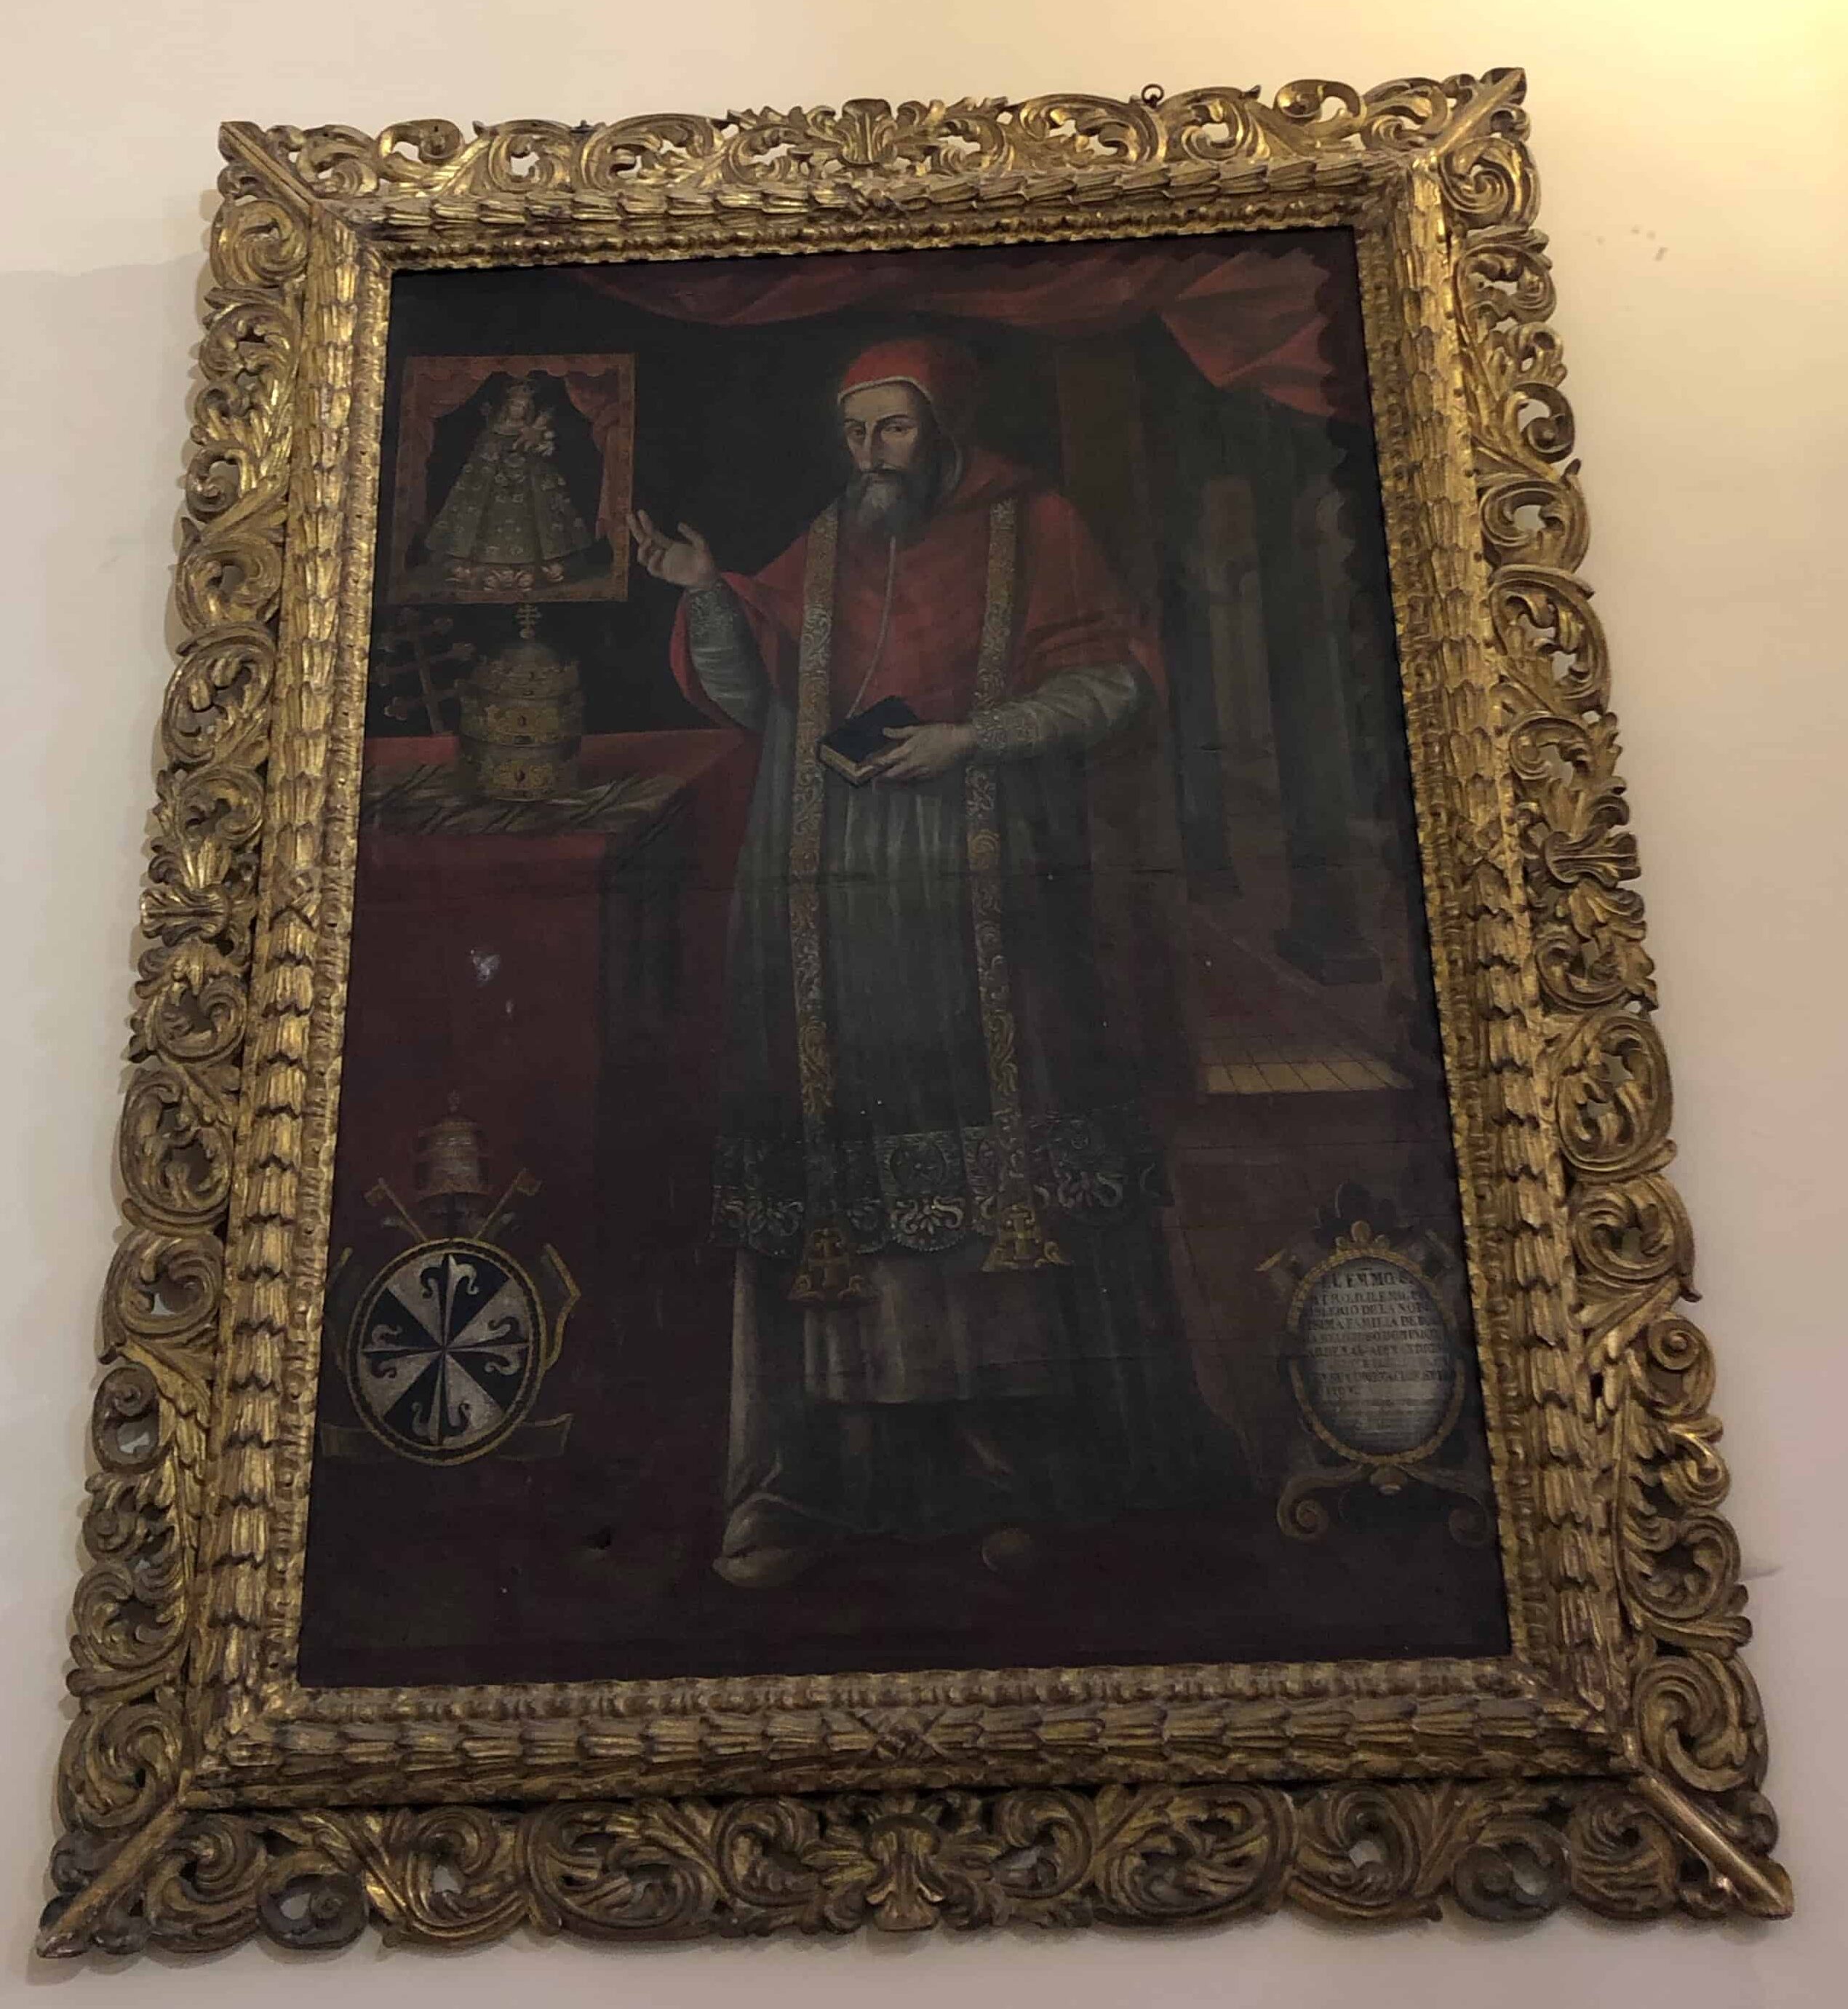 Painting by Gregorio Vásquez in the Chapel of the Tabernacle in La Candelaria, Bogotá, Colombia